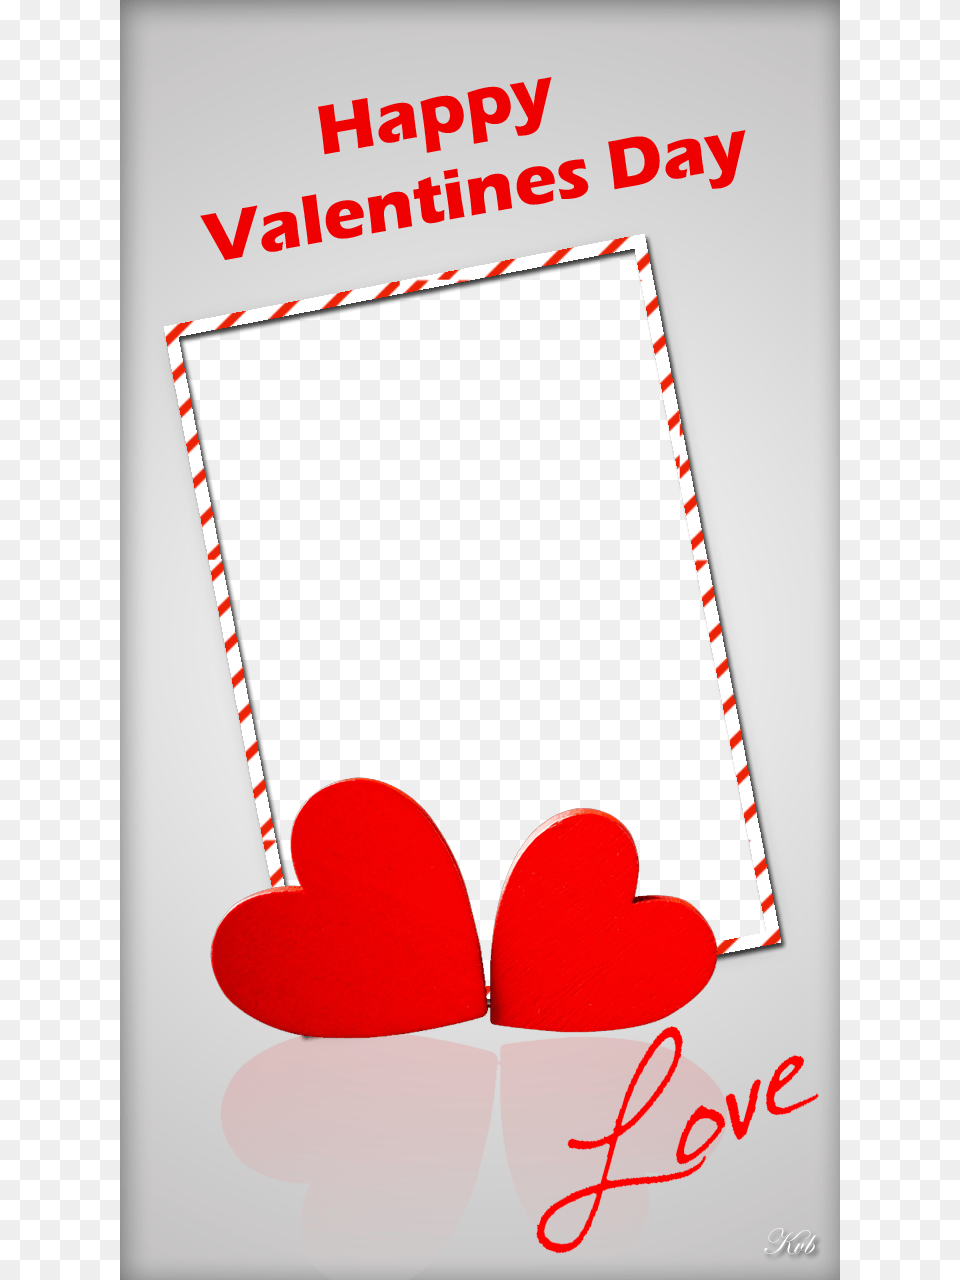 Valentine Frame With Heart Ritchie Valens La Bamba, Envelope, Greeting Card, Mail Free Transparent Png